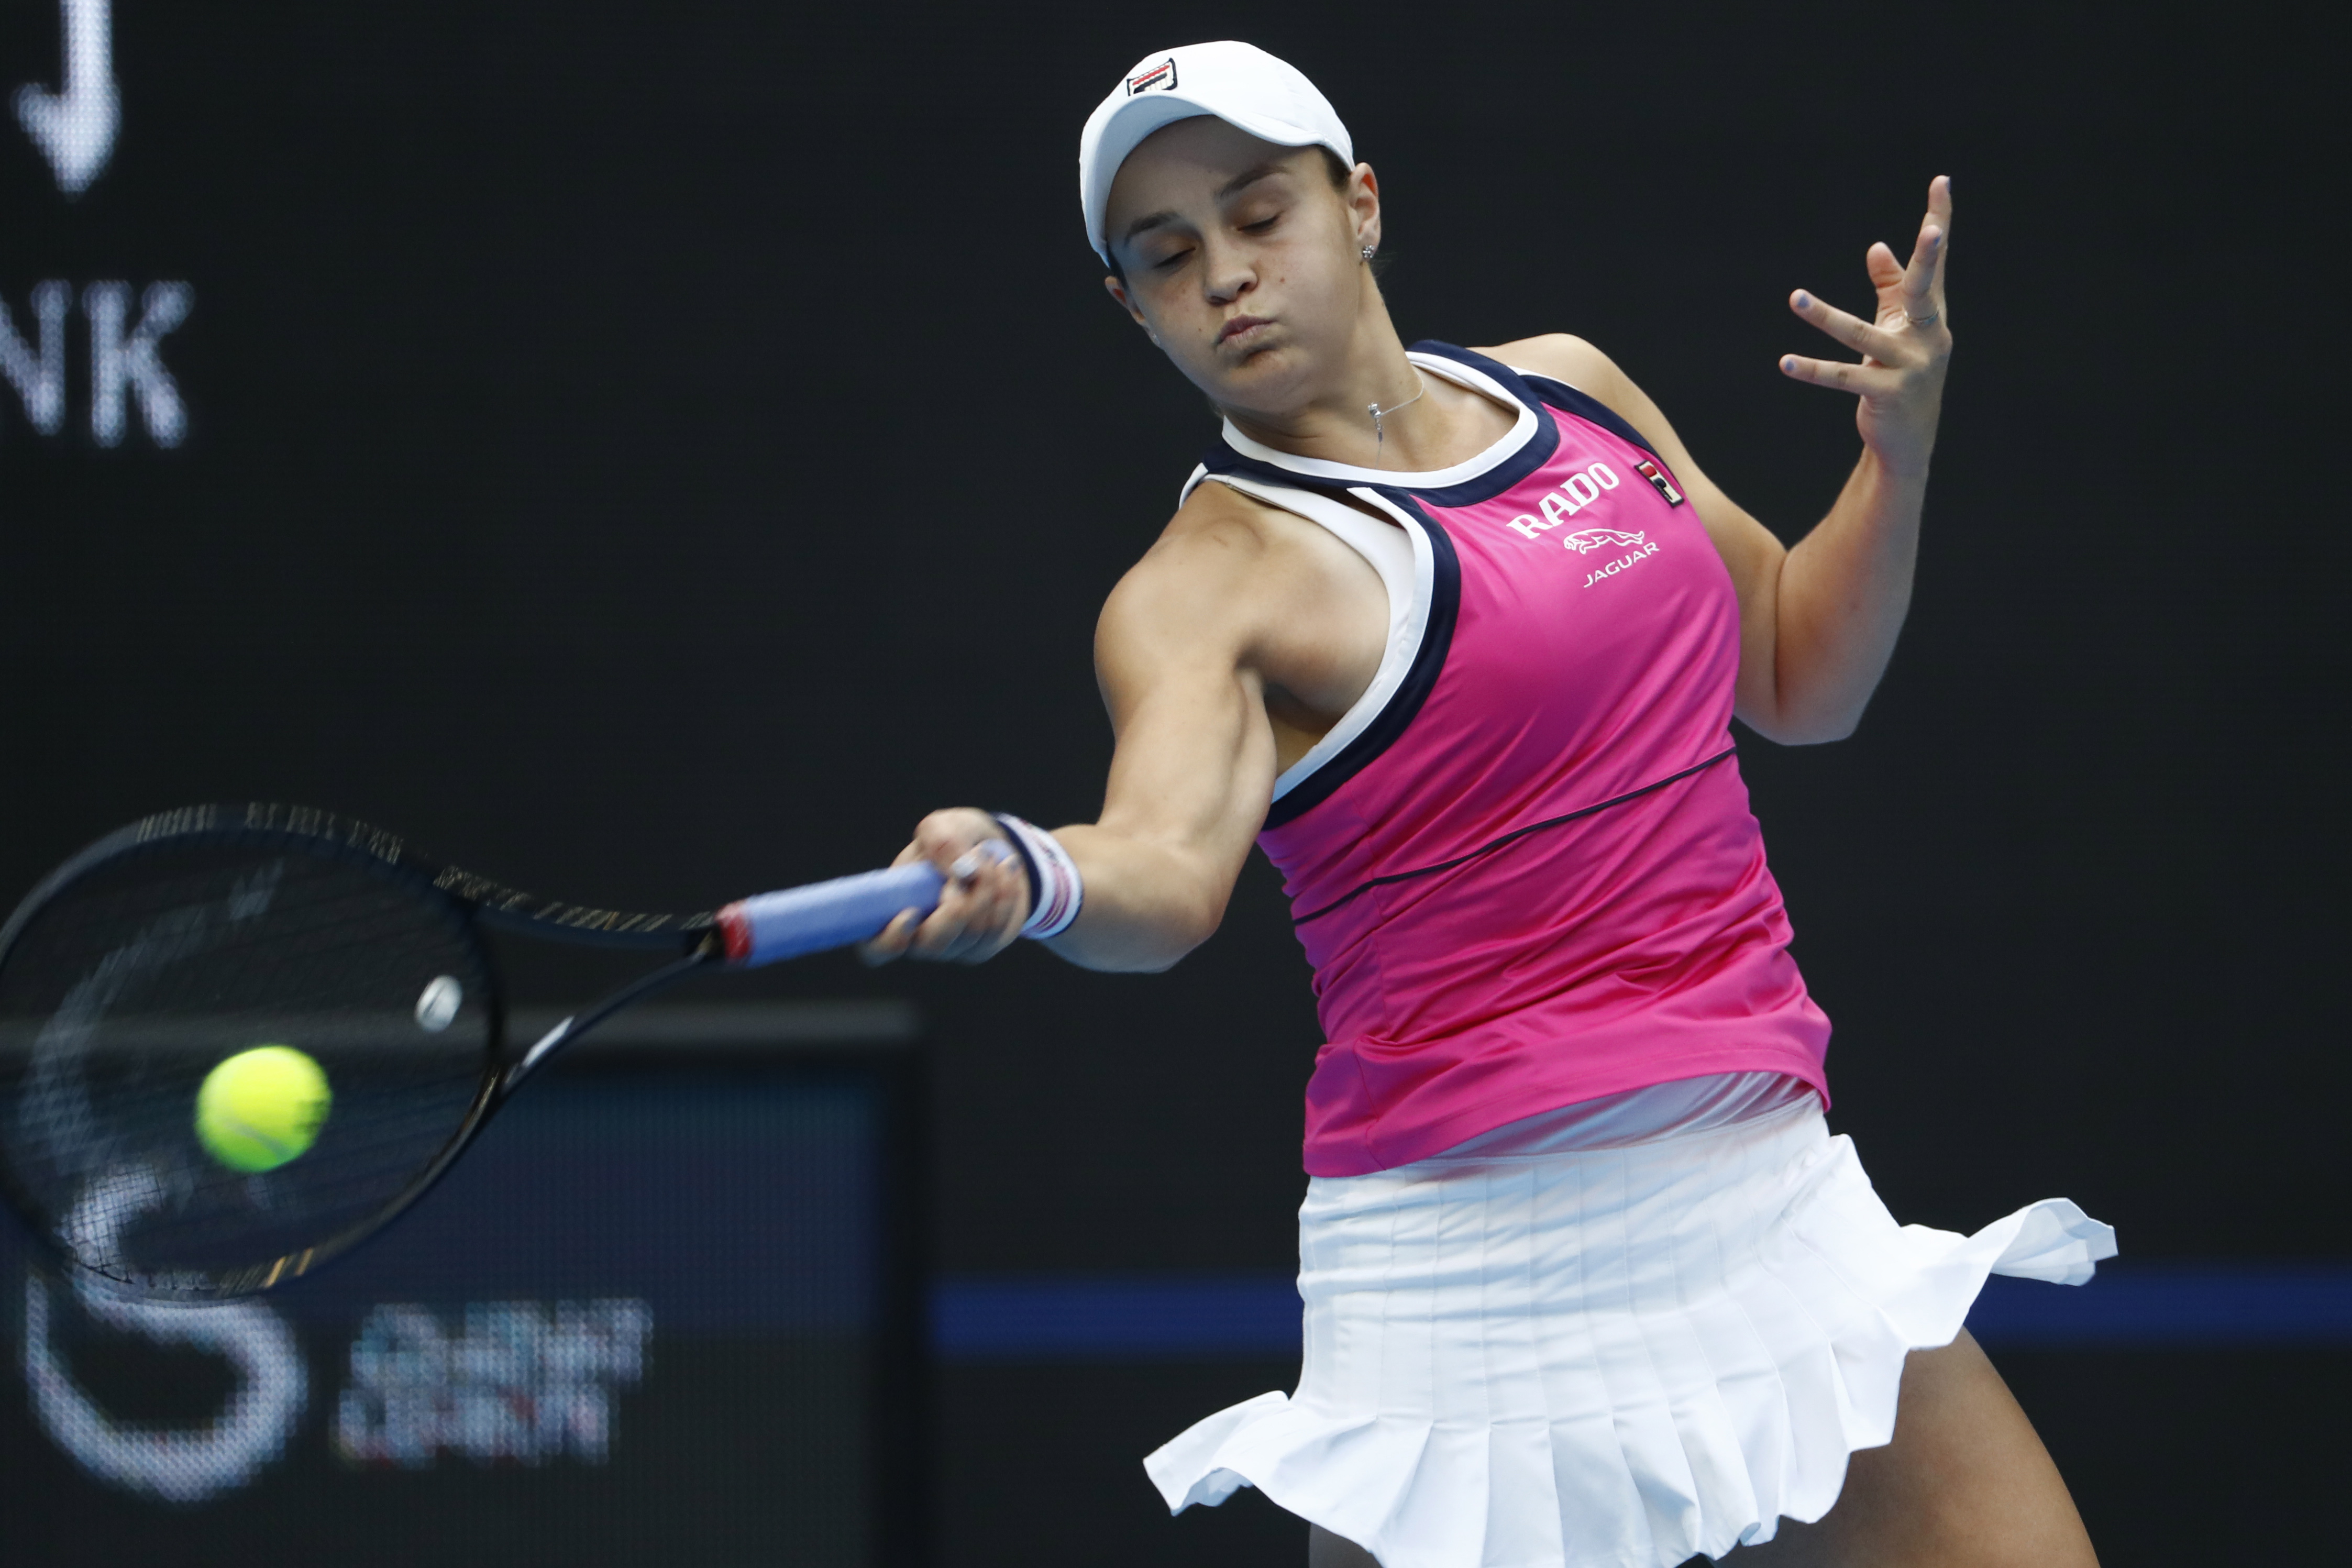 epa07897284 Ashleigh Barty of Australia in action against Kiki Bertens of The Netherlands during their women's singles semi-final match at the China Open tennis tournament in Beijing, China, 05 October 2019.  EPA/WU HONG